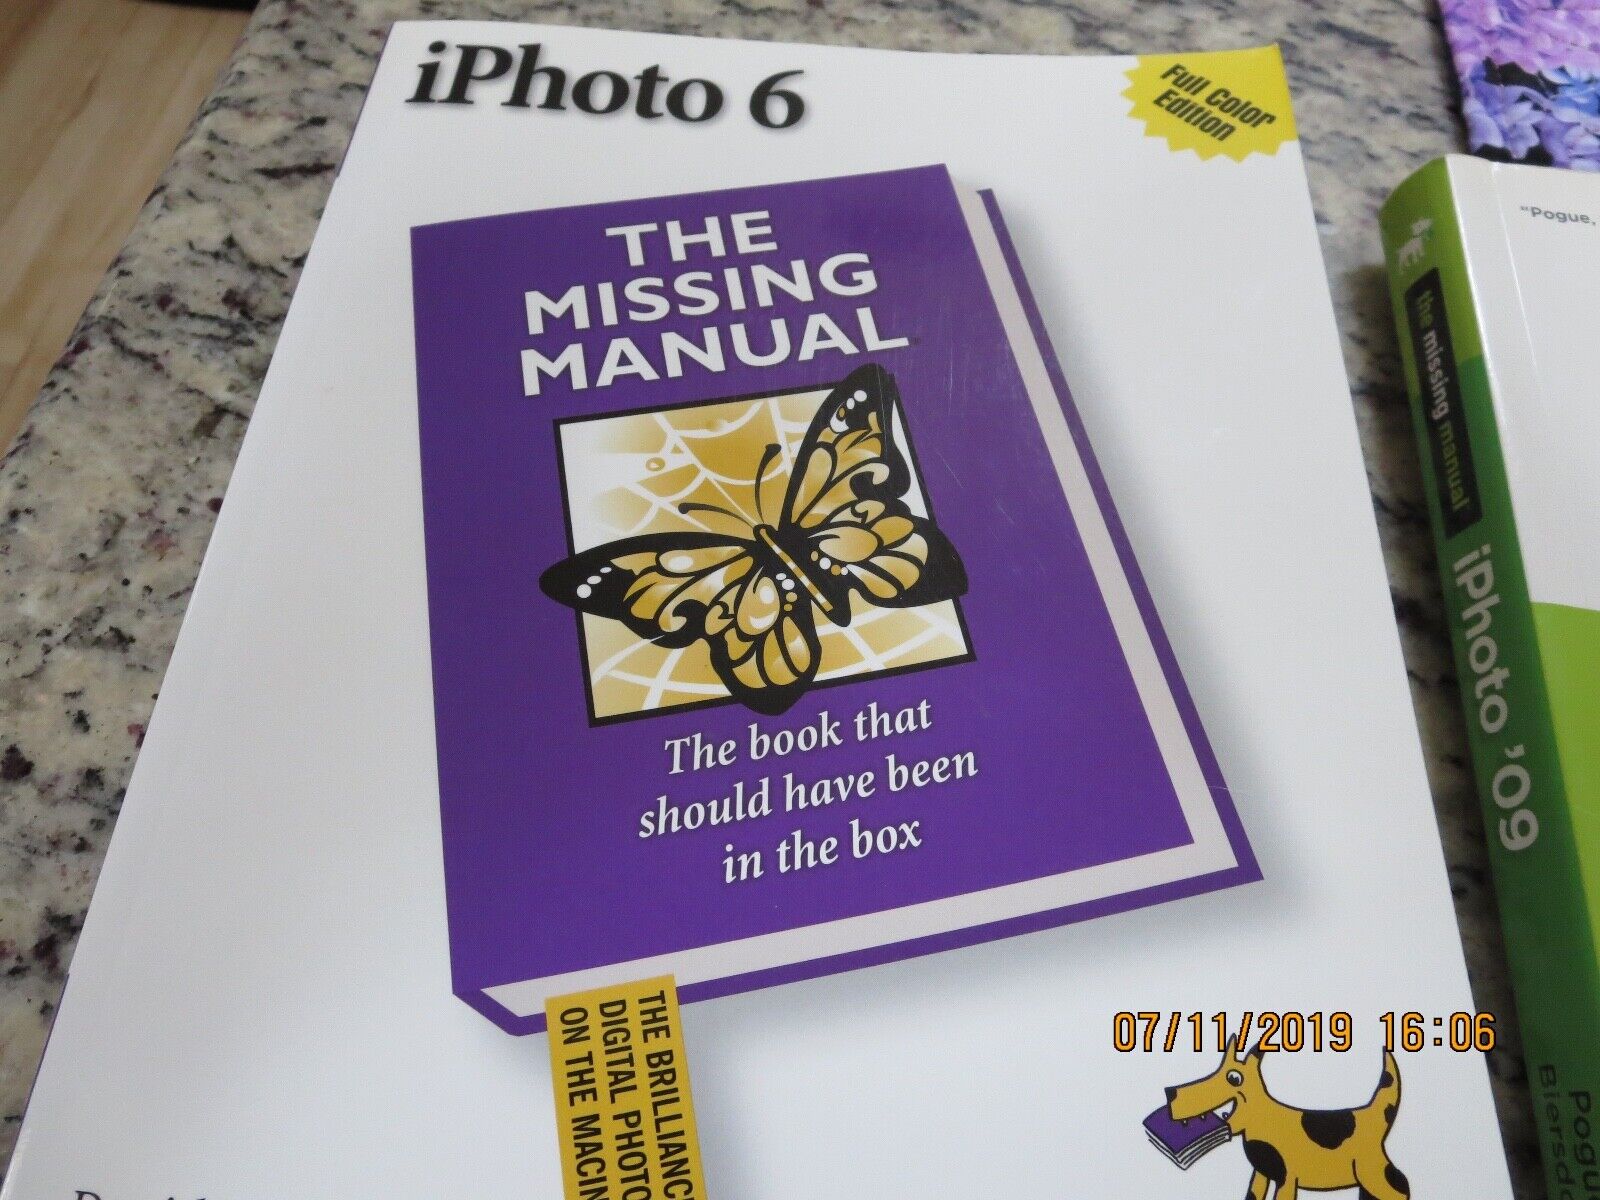 i PHOTO 6 THE MISSING MANUAL-#GLP2